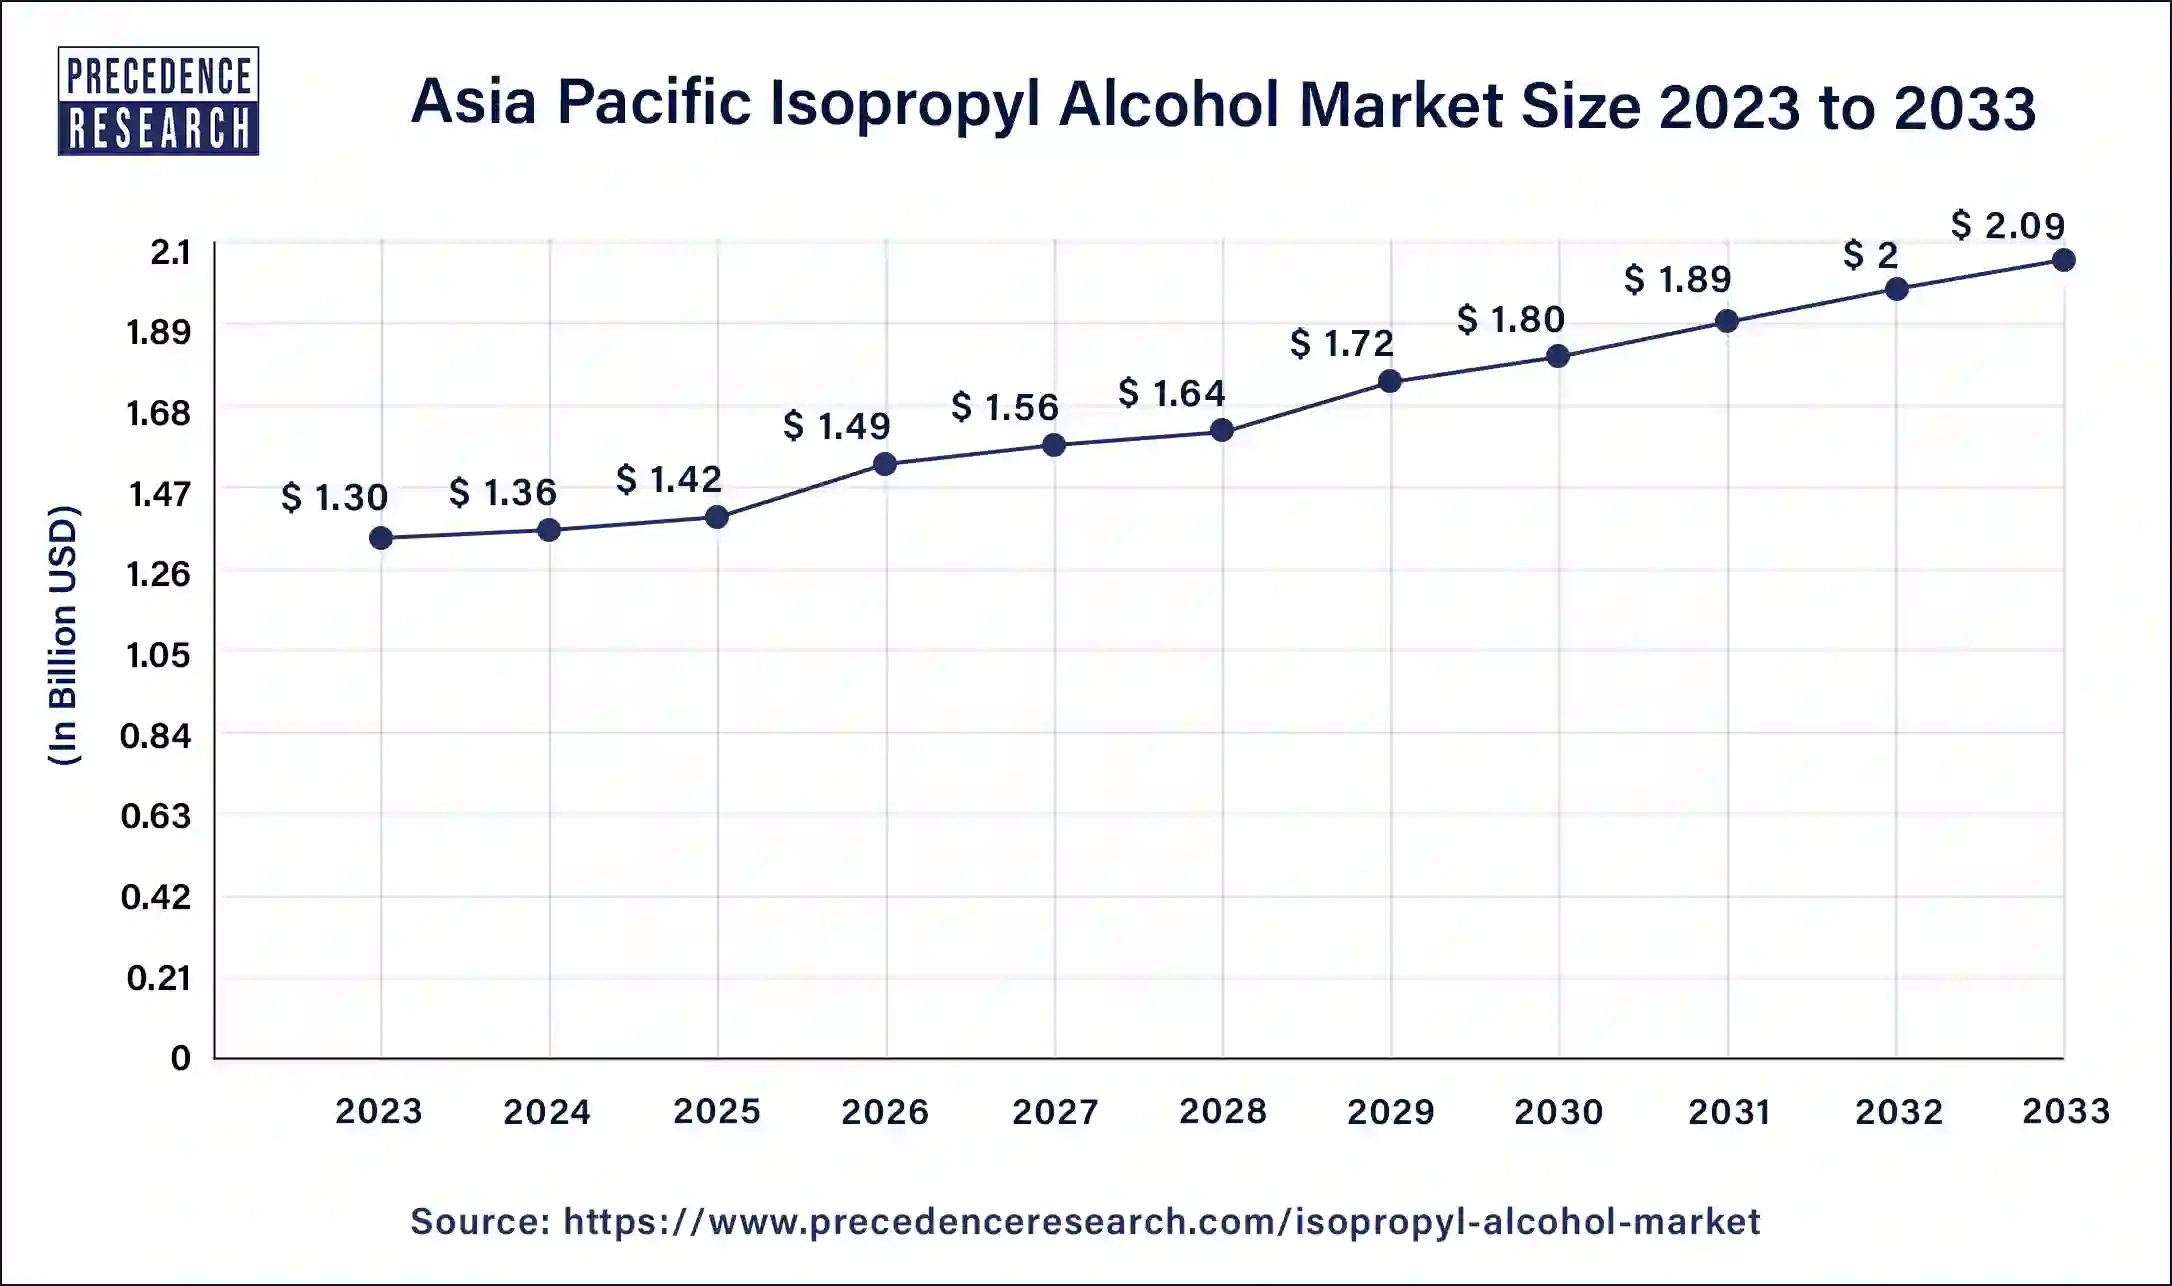 Asia Pacific Isopropyl Alcohol Market Size 2024 to 2033